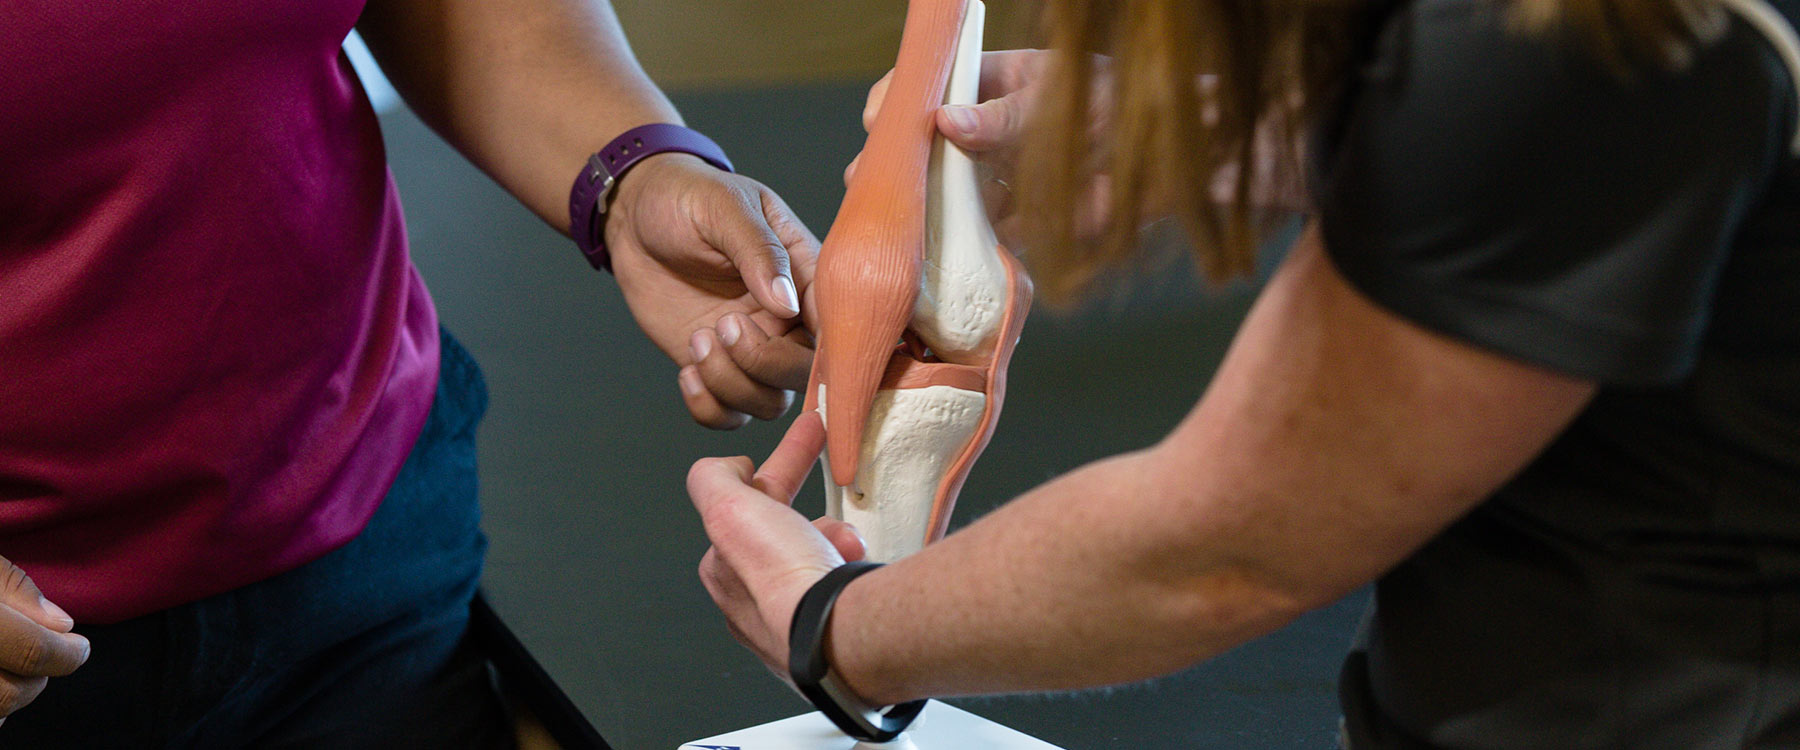 One student holds a functional model of the knee and points to a ligament as another student stands nearby watching.